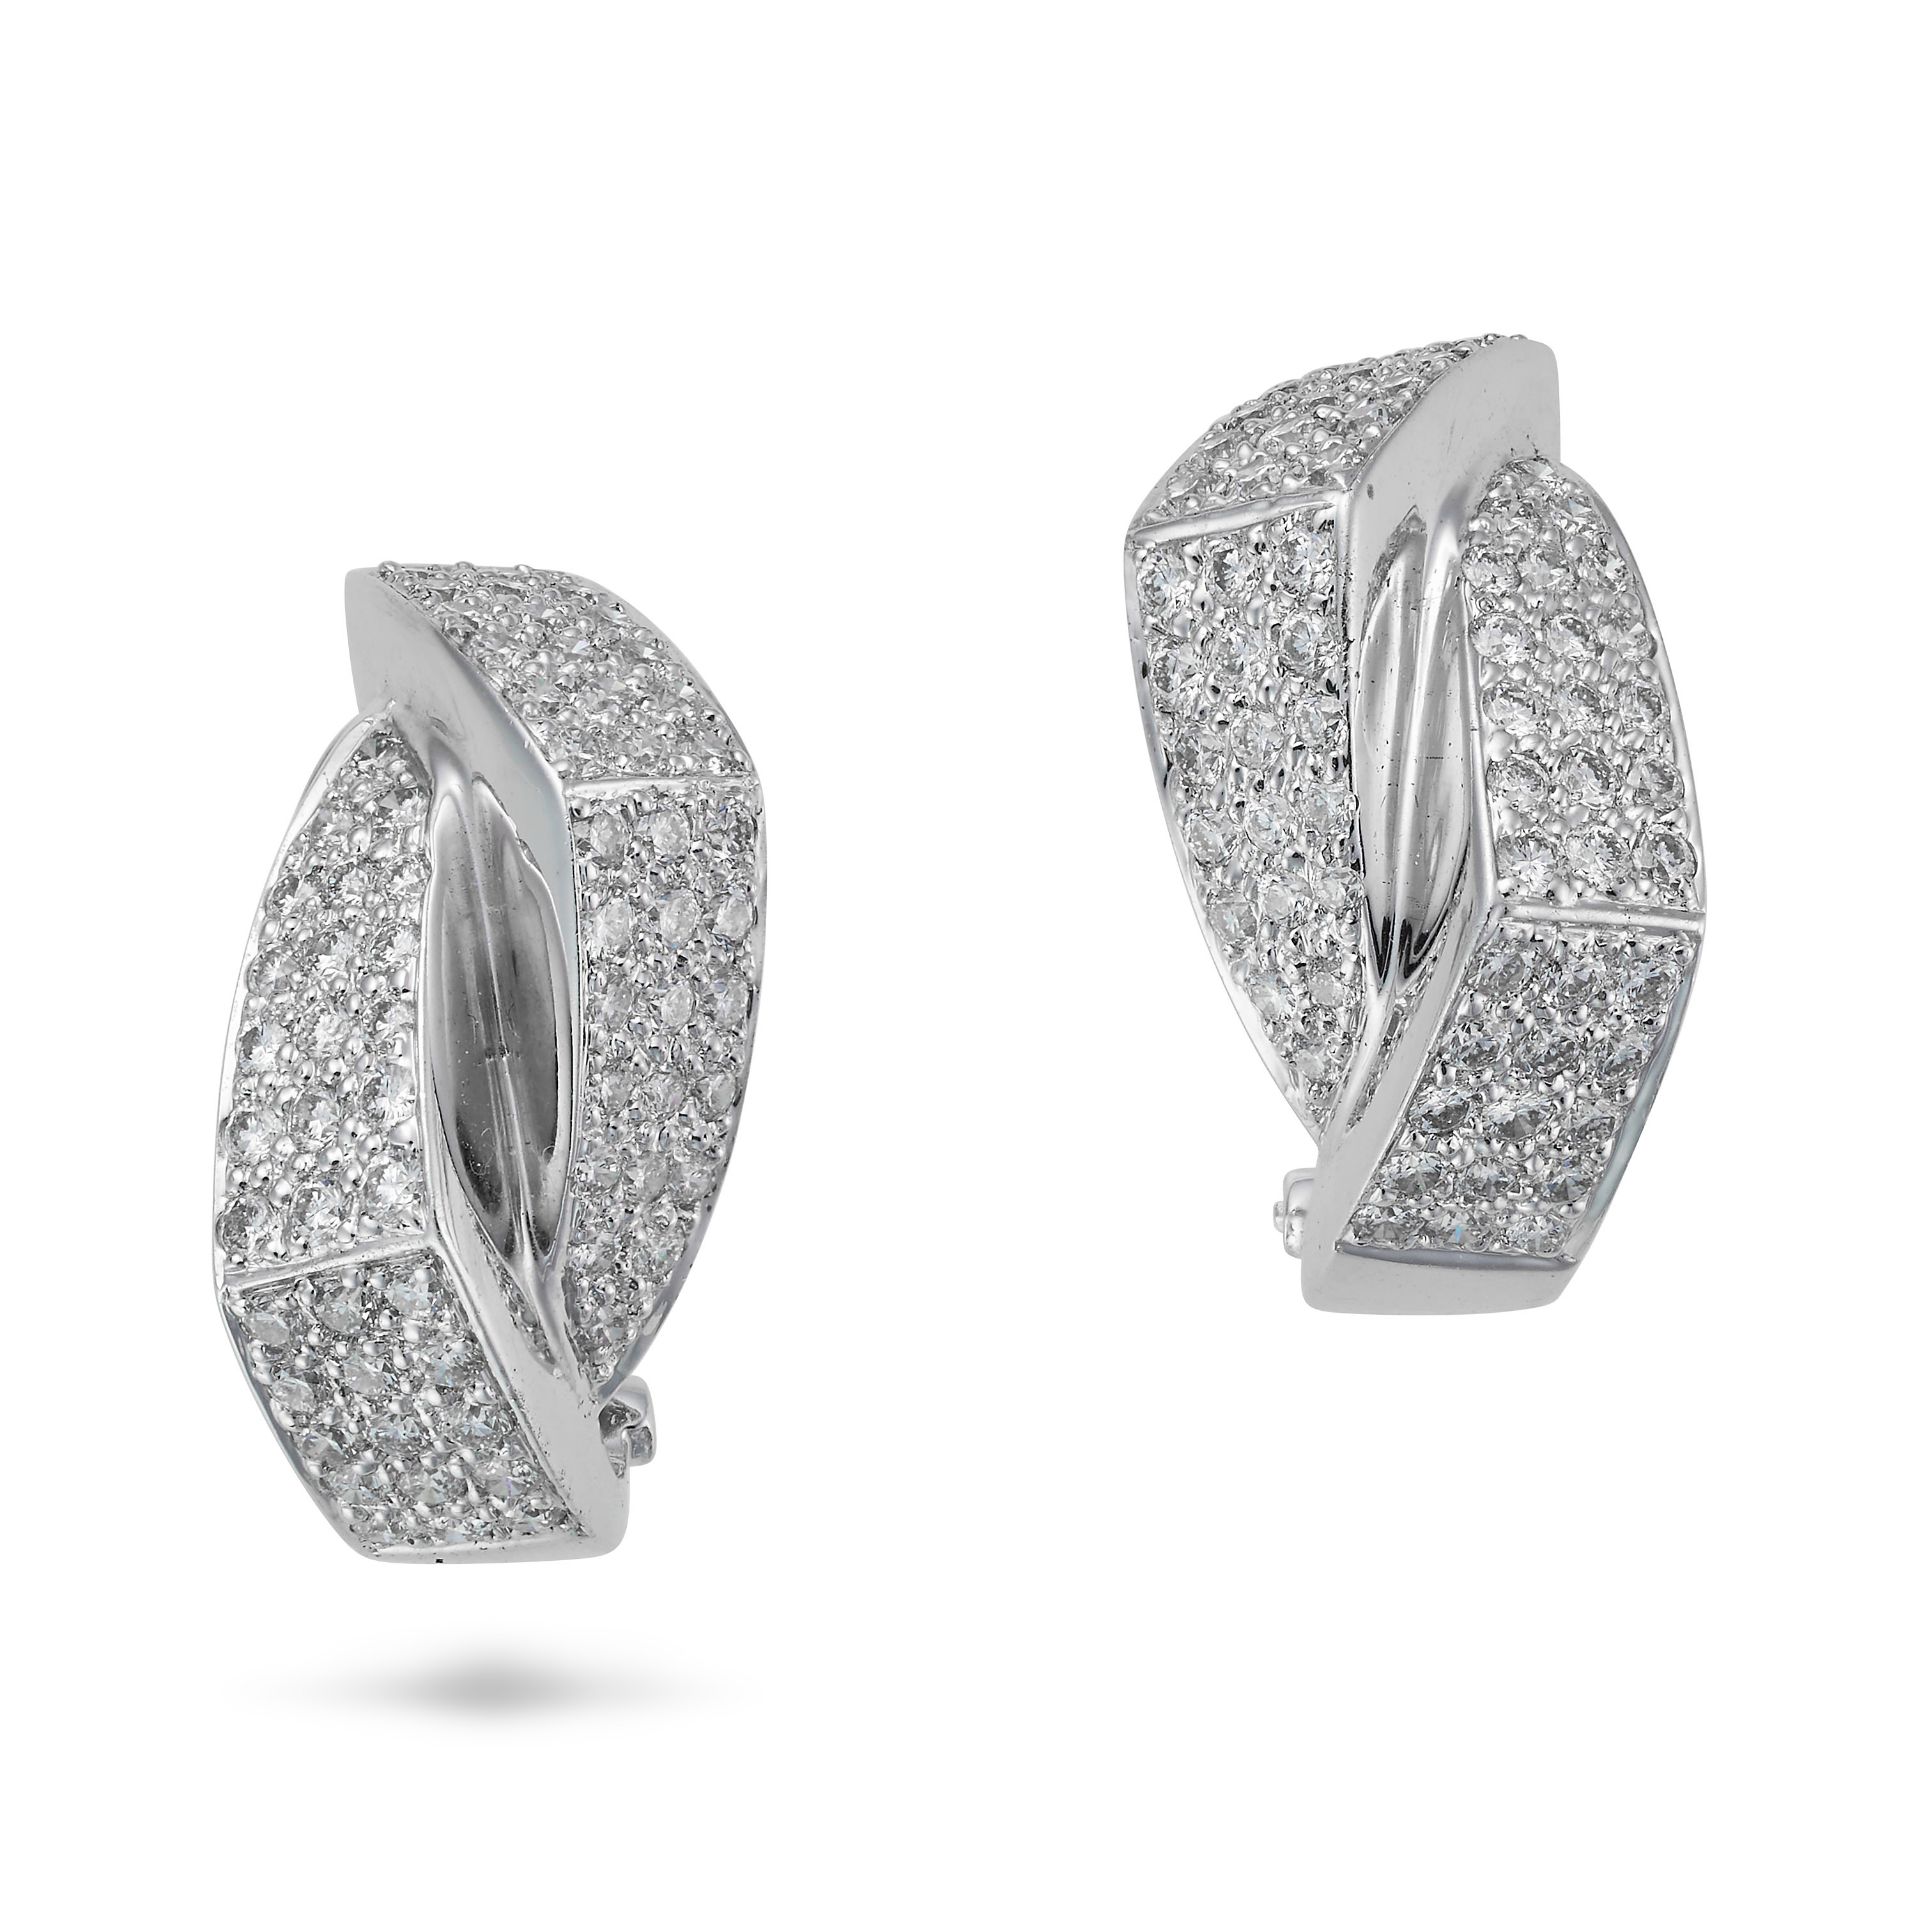 A PAIR OF DIAMOND HOOP EARRINGS each designed as a stylised hoop pave set with round brilliant cu...